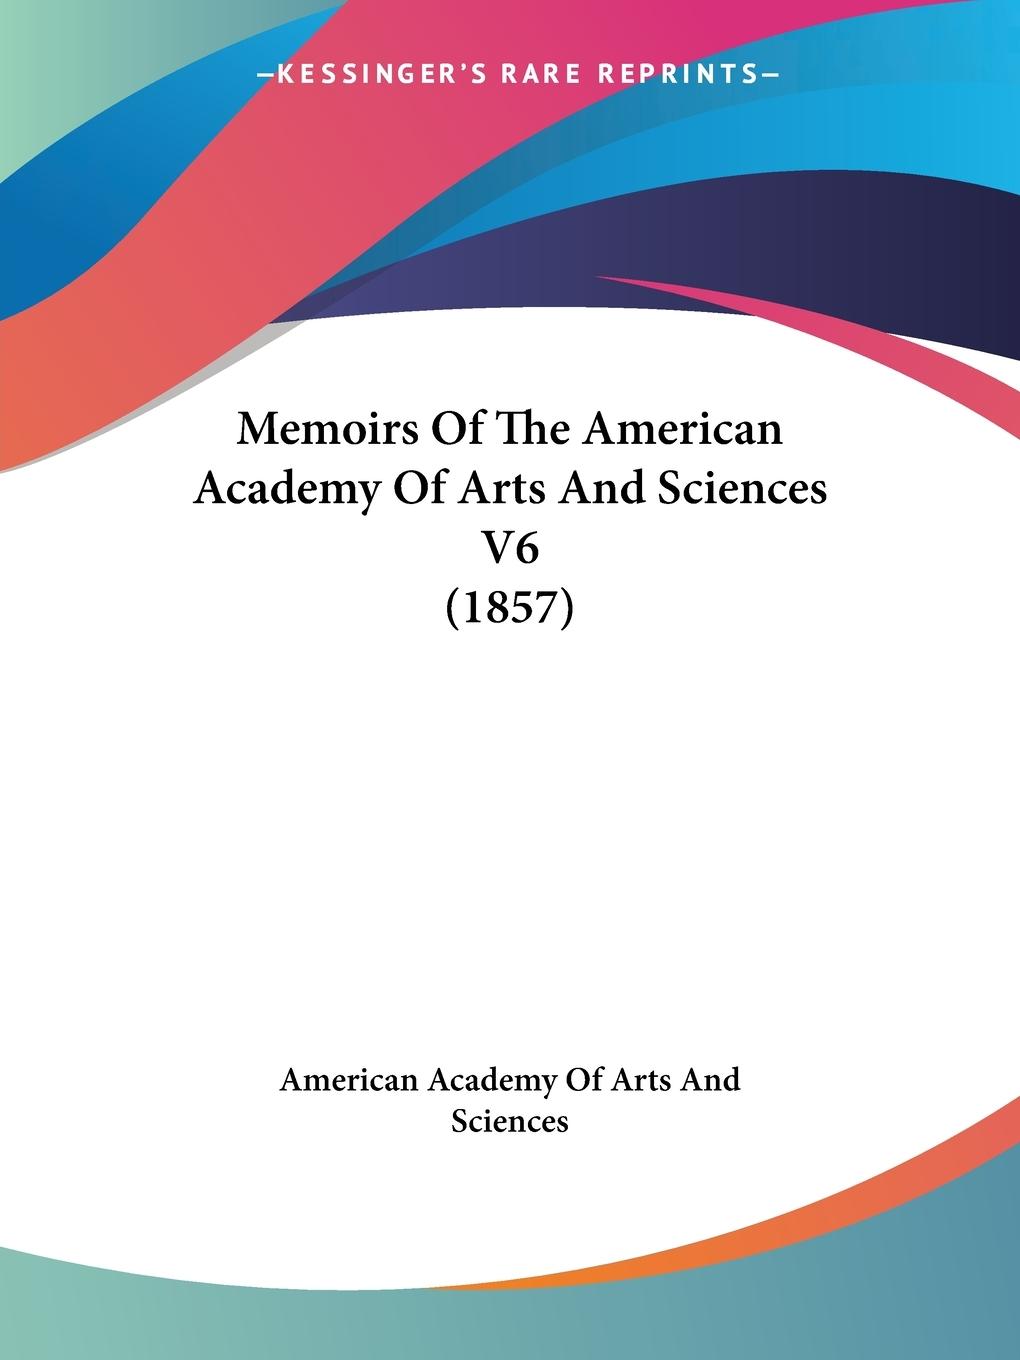 Memoirs Of The American Academy Of Arts And Sciences V6 (1857) - American Academy Of Arts And Sciences